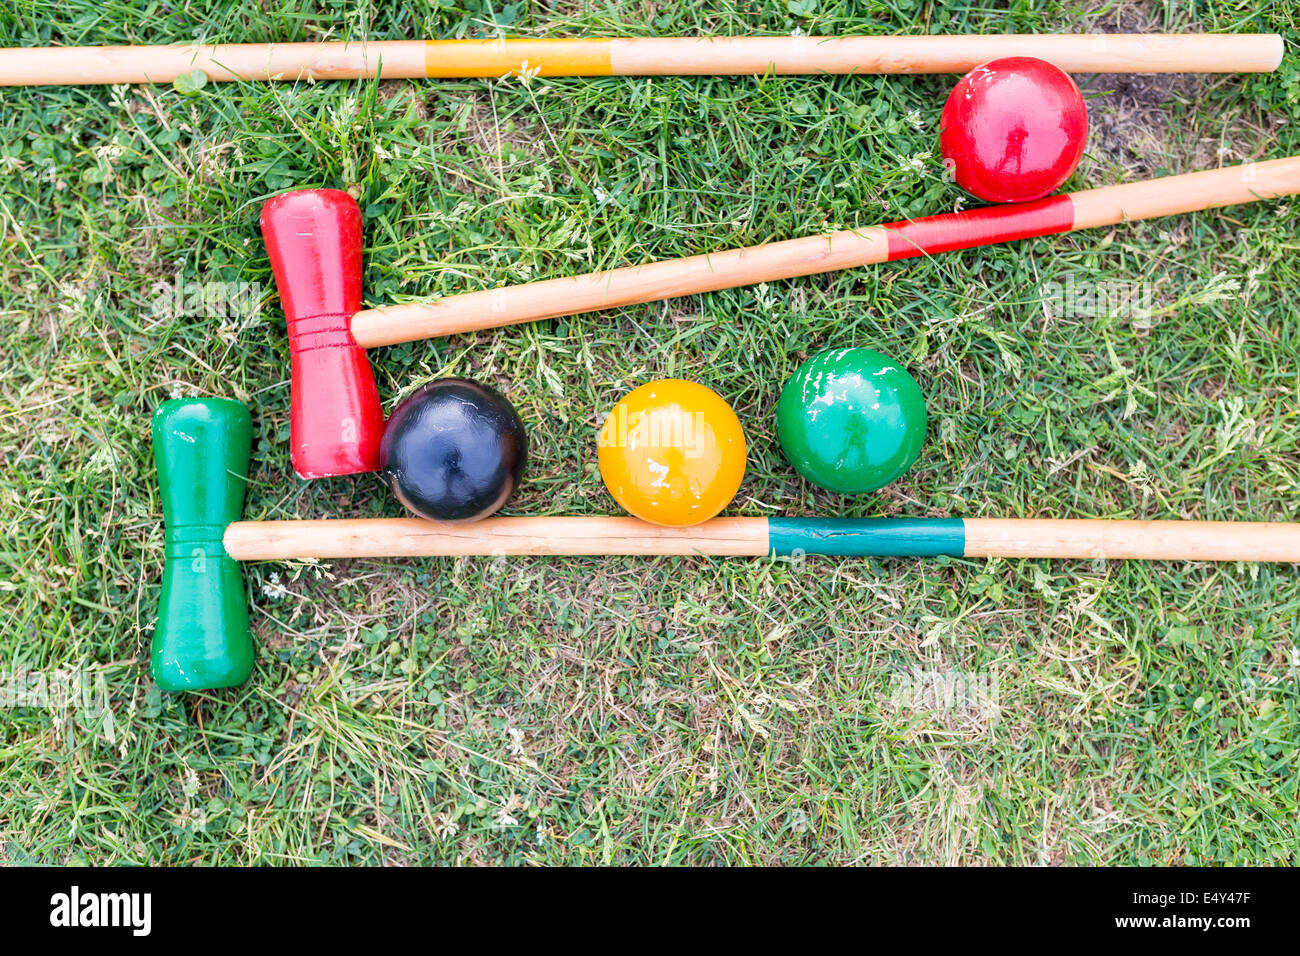 Clubs and balls belonging to a croquet game lying on green grass Stock Photo